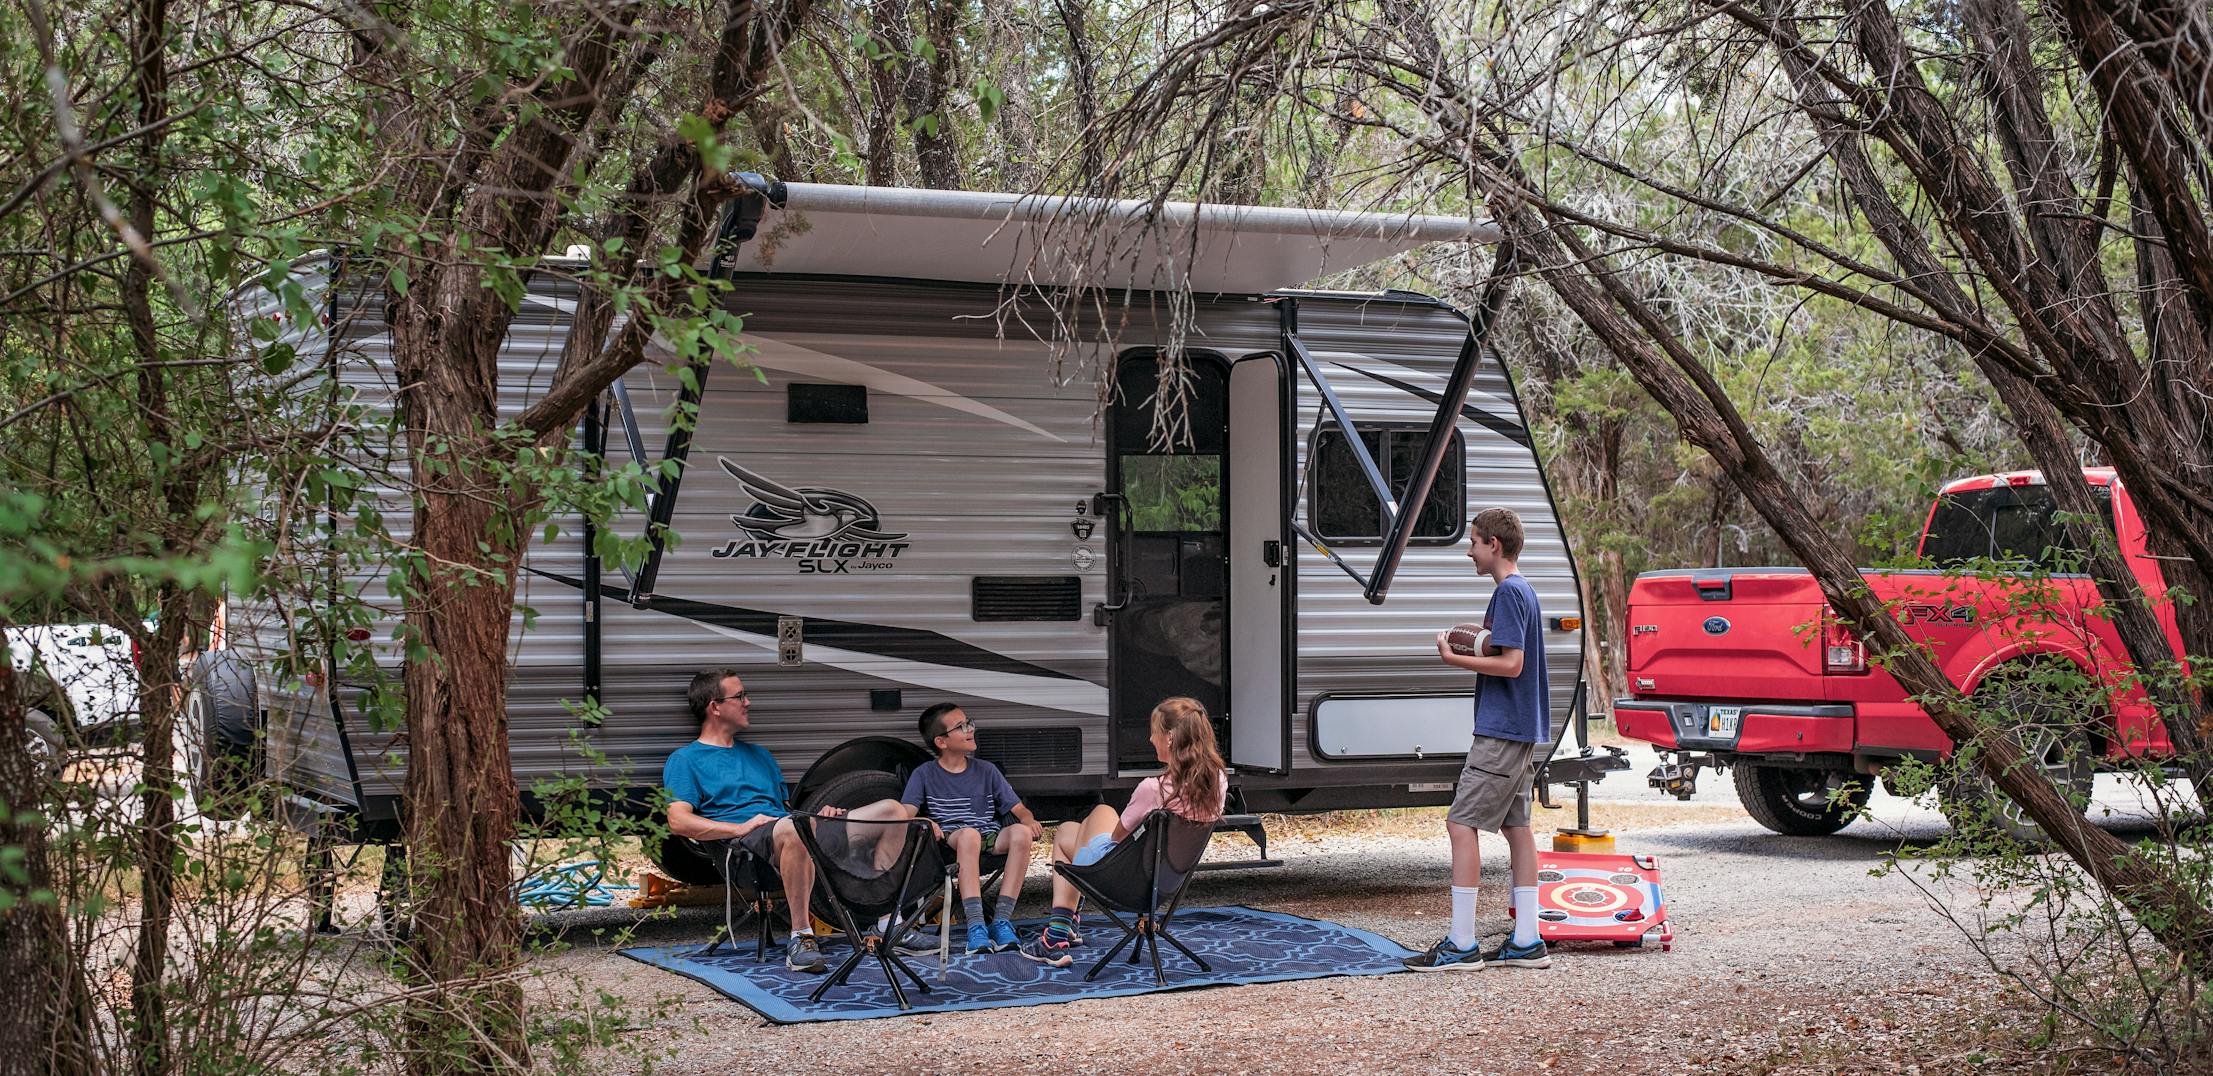 Alison Takacs and her family sitting in front of their RV at their campsite in Dinosaur Valley State Park